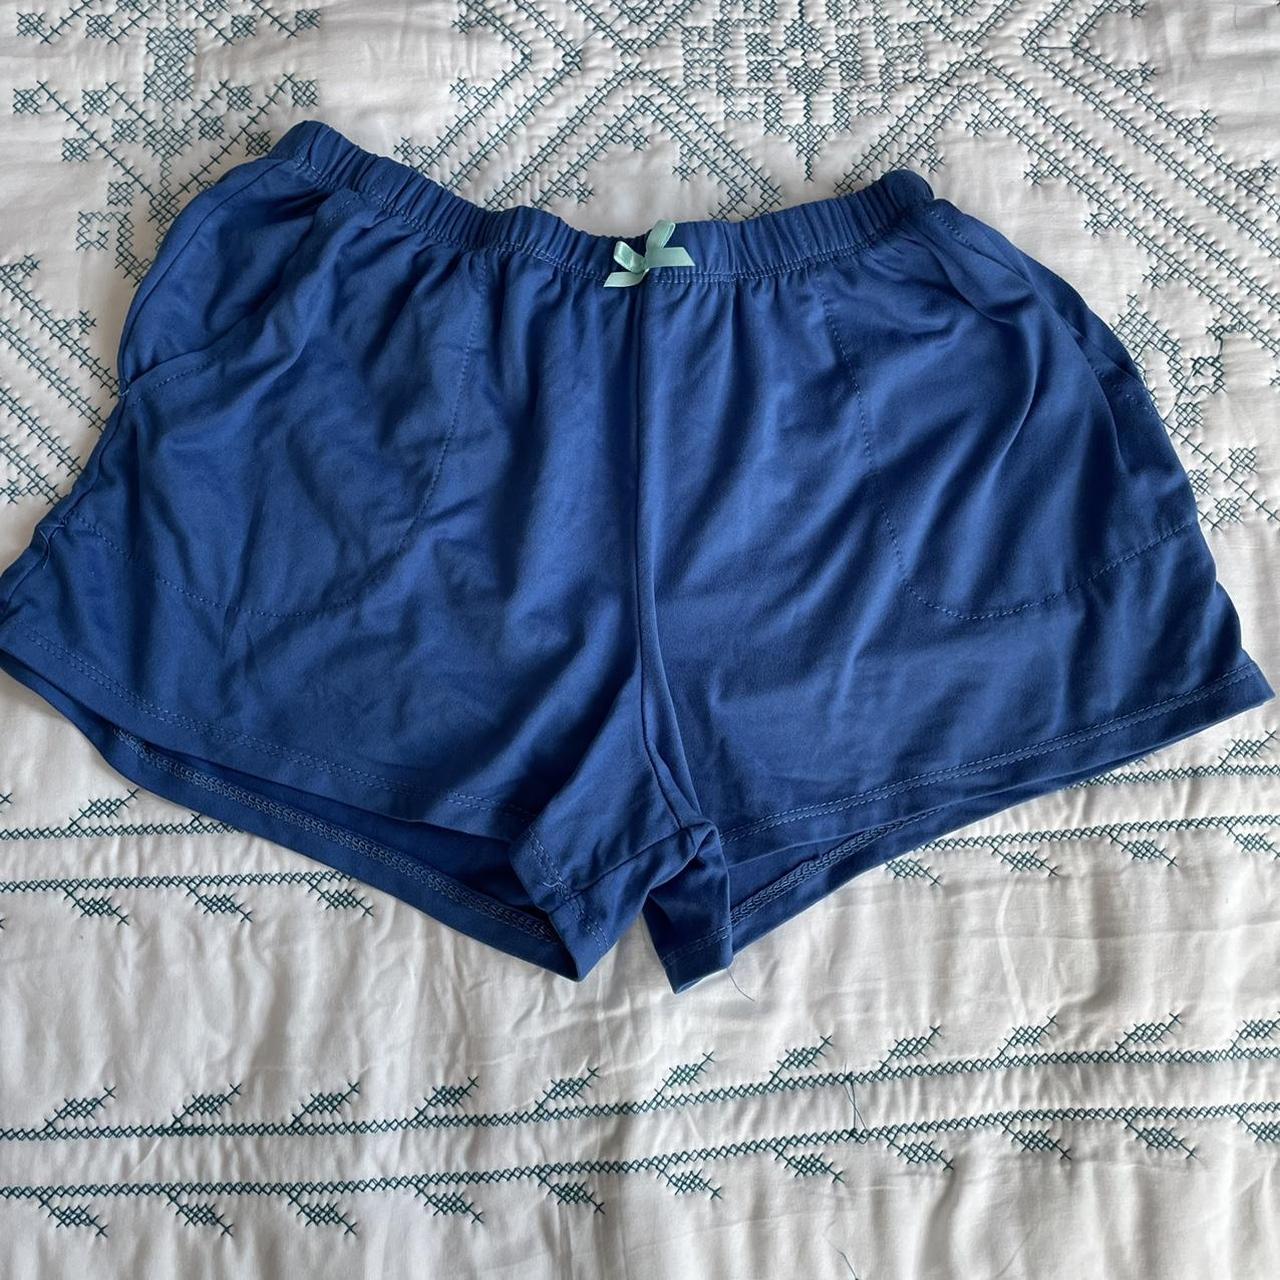 Product Image 1 - Blue pj shorts with pockets